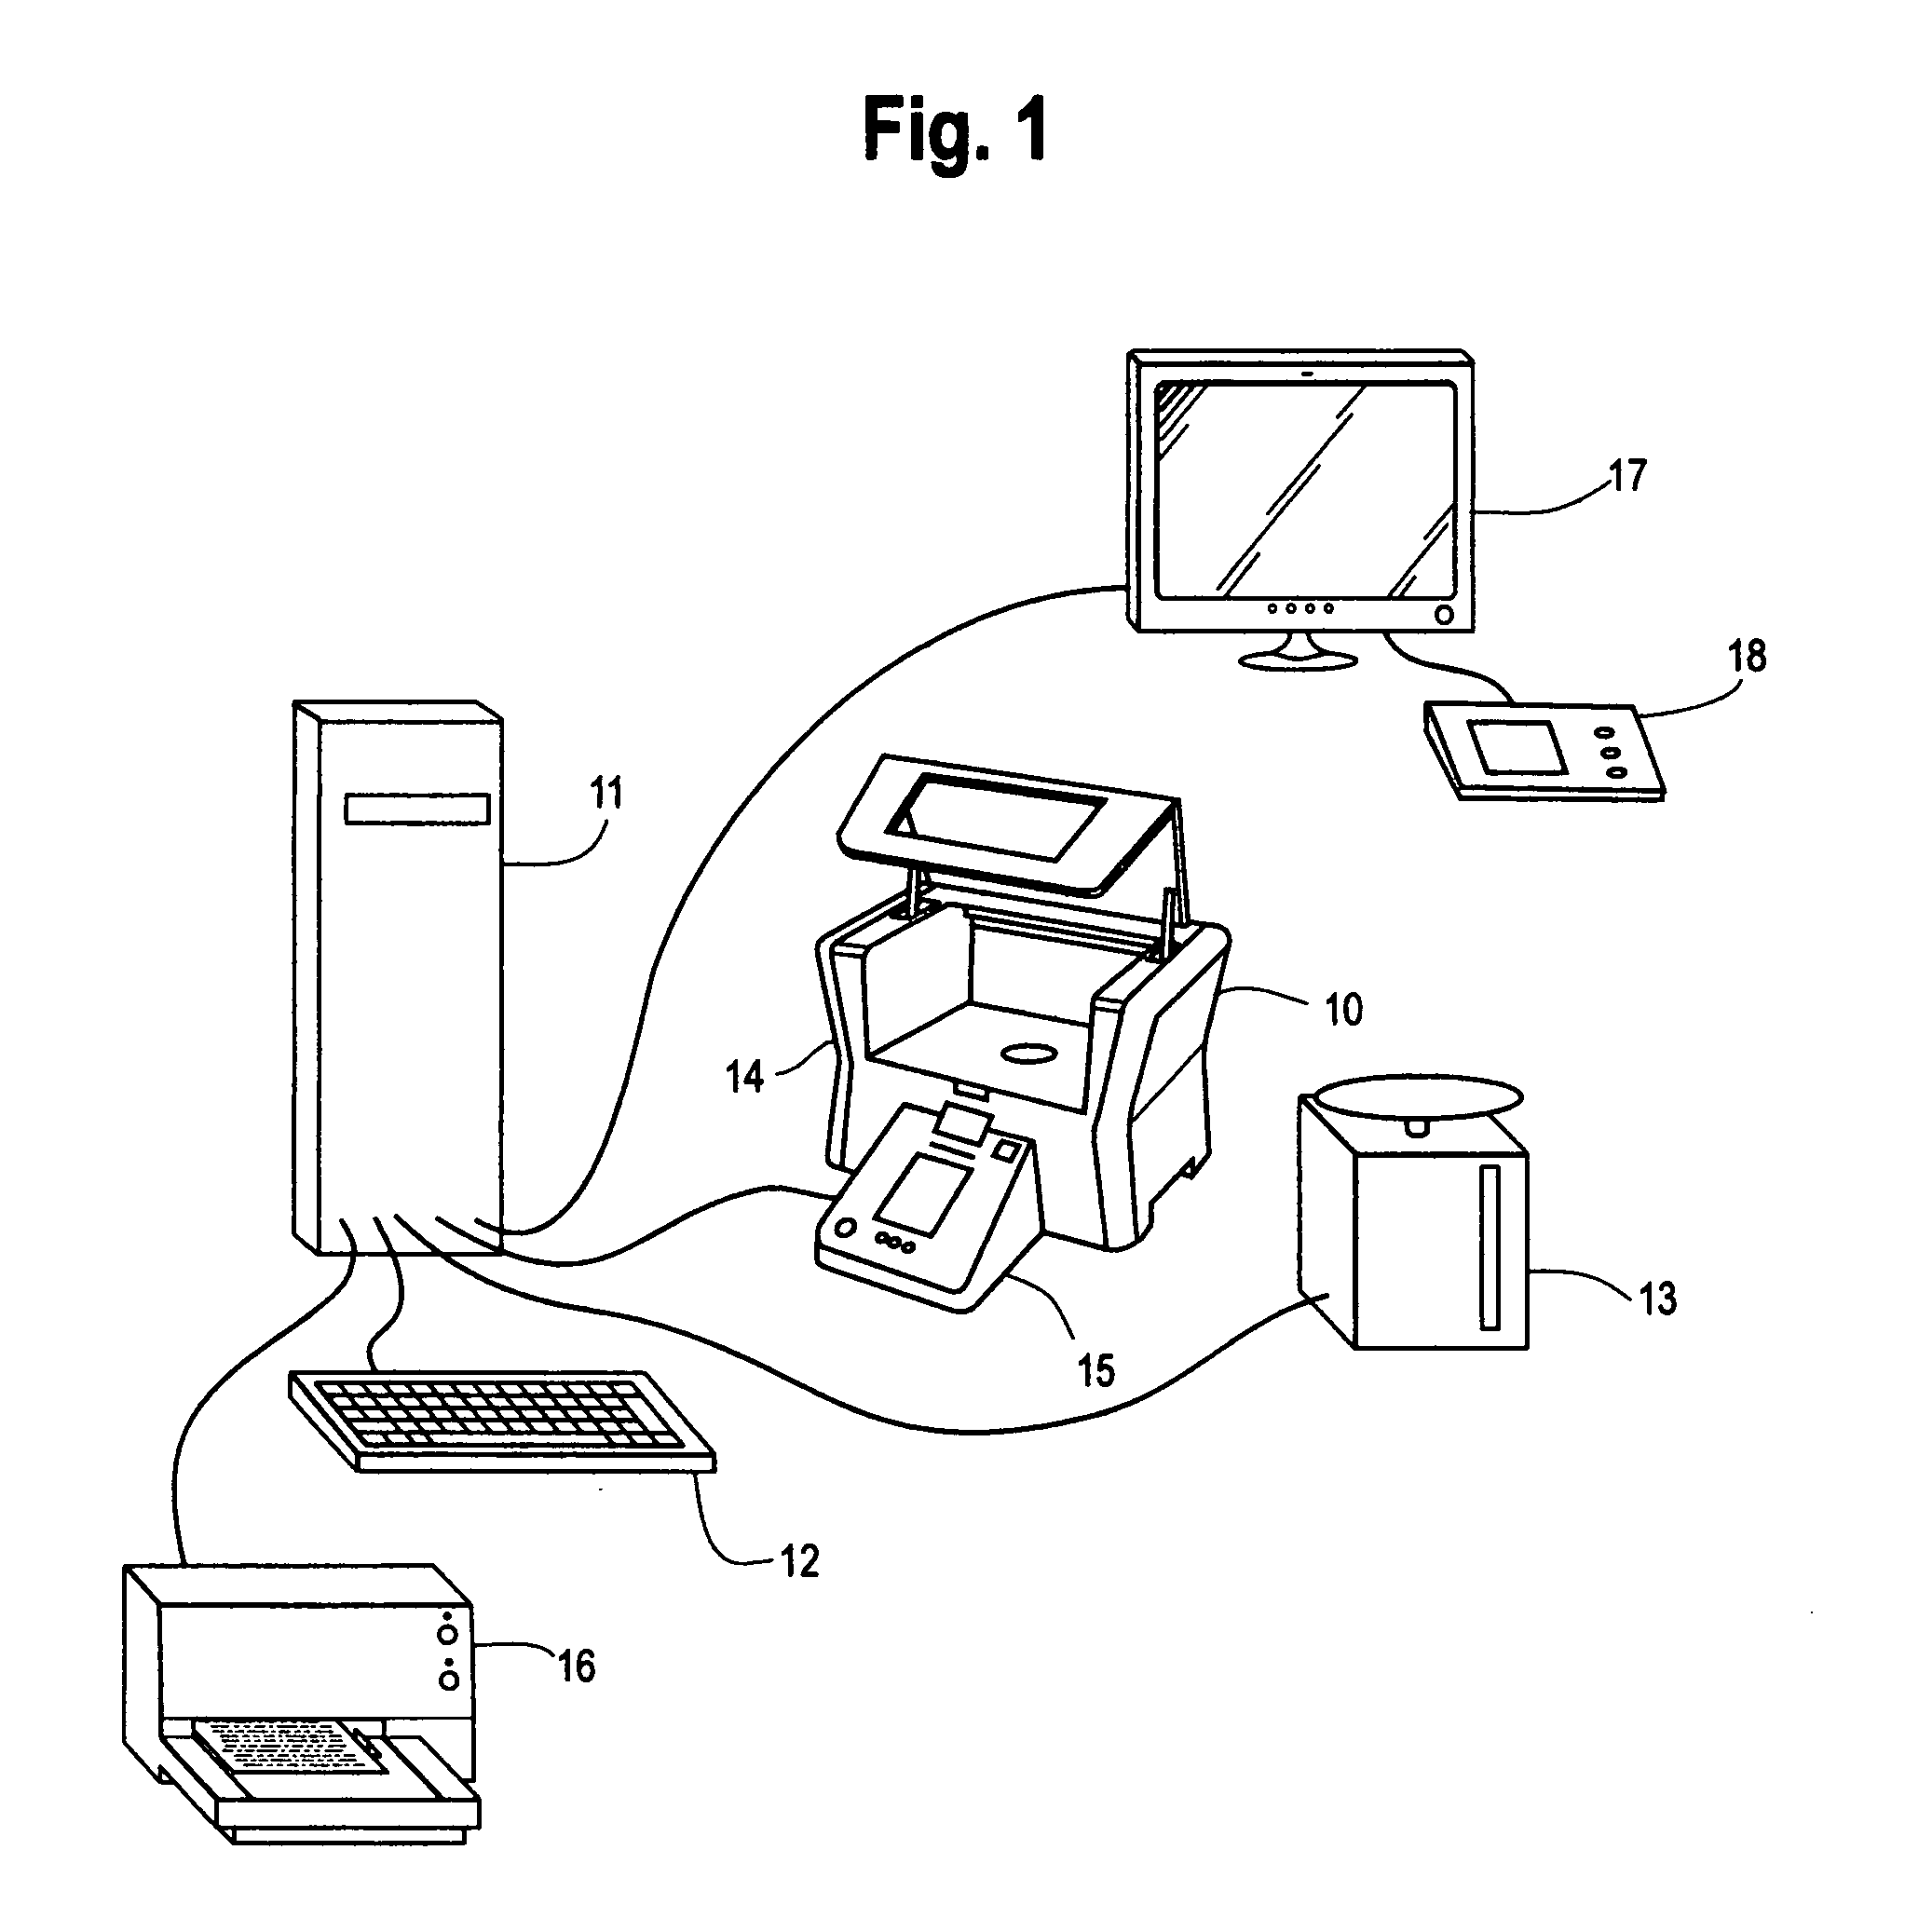 Method and apparatus for the automated assay and valuation of precious metal objects